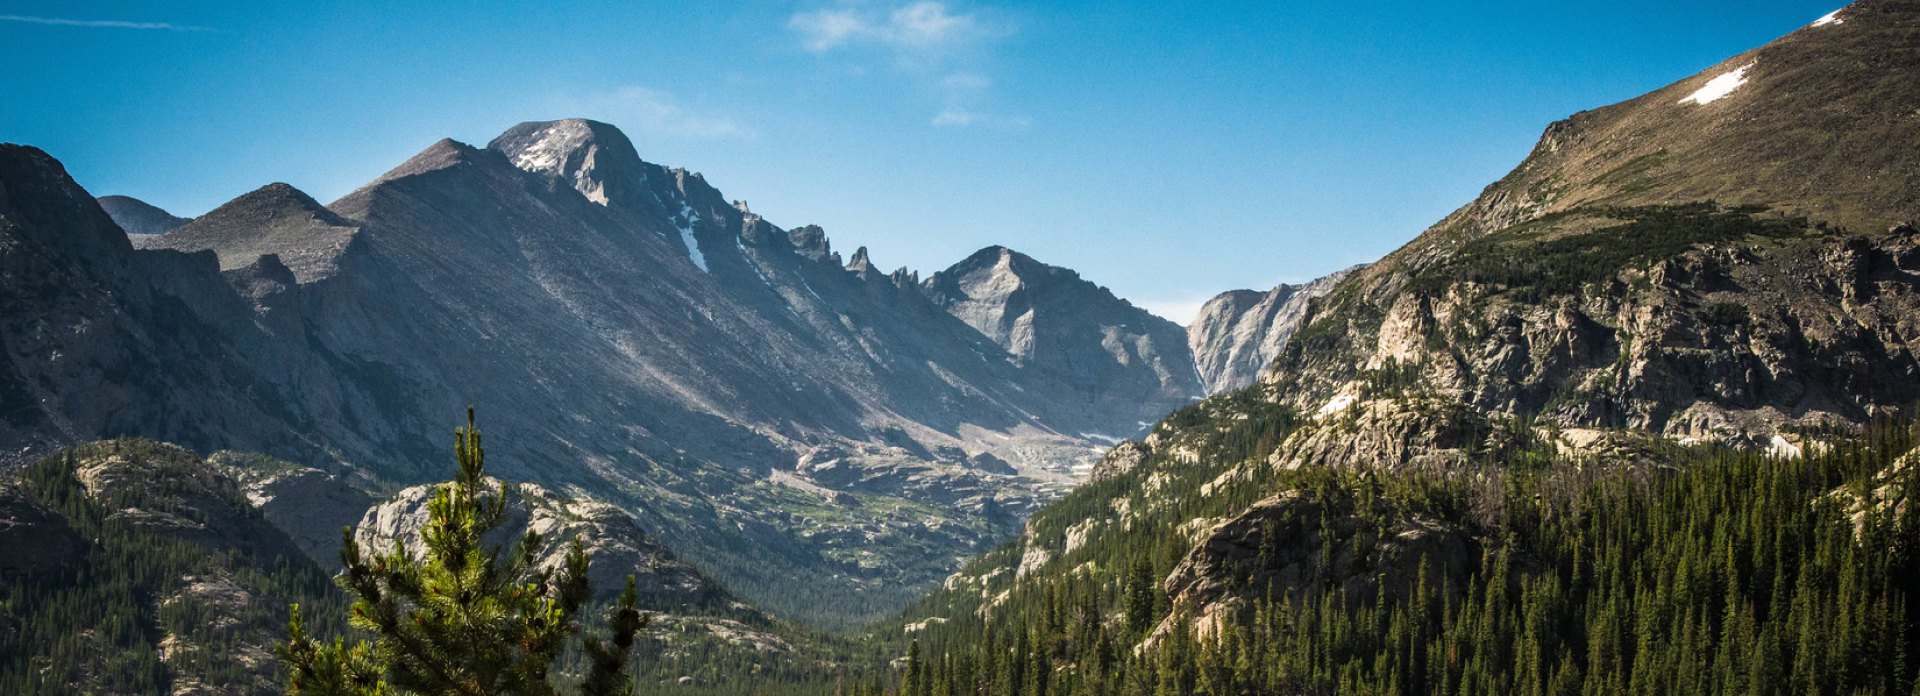 21 AWESOME PLACES TO SEE IN COLORADO